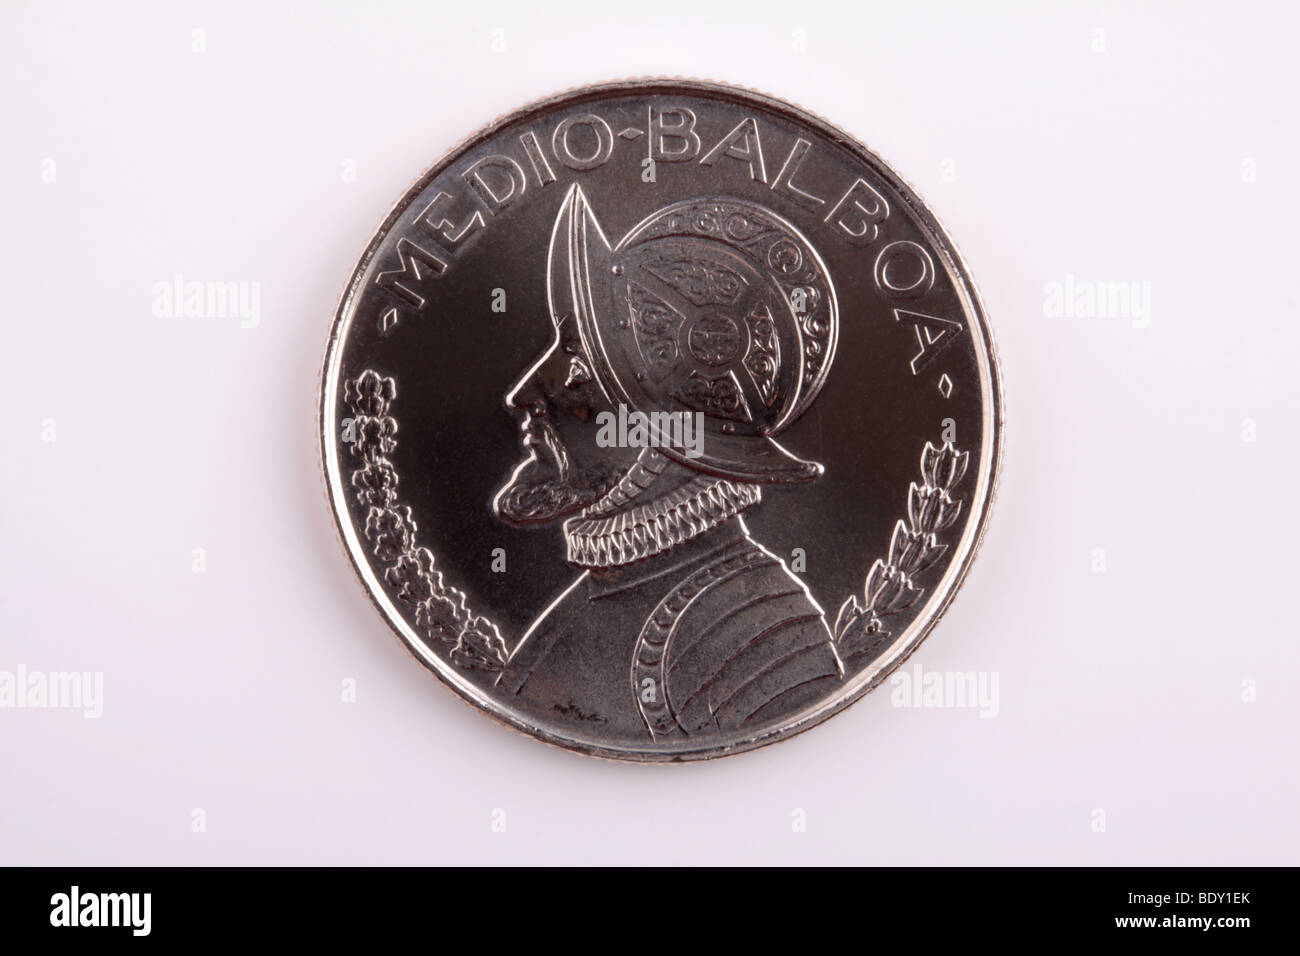 A medio balboa coin from Panama (50 cent coin) obverse view. Stock Photo